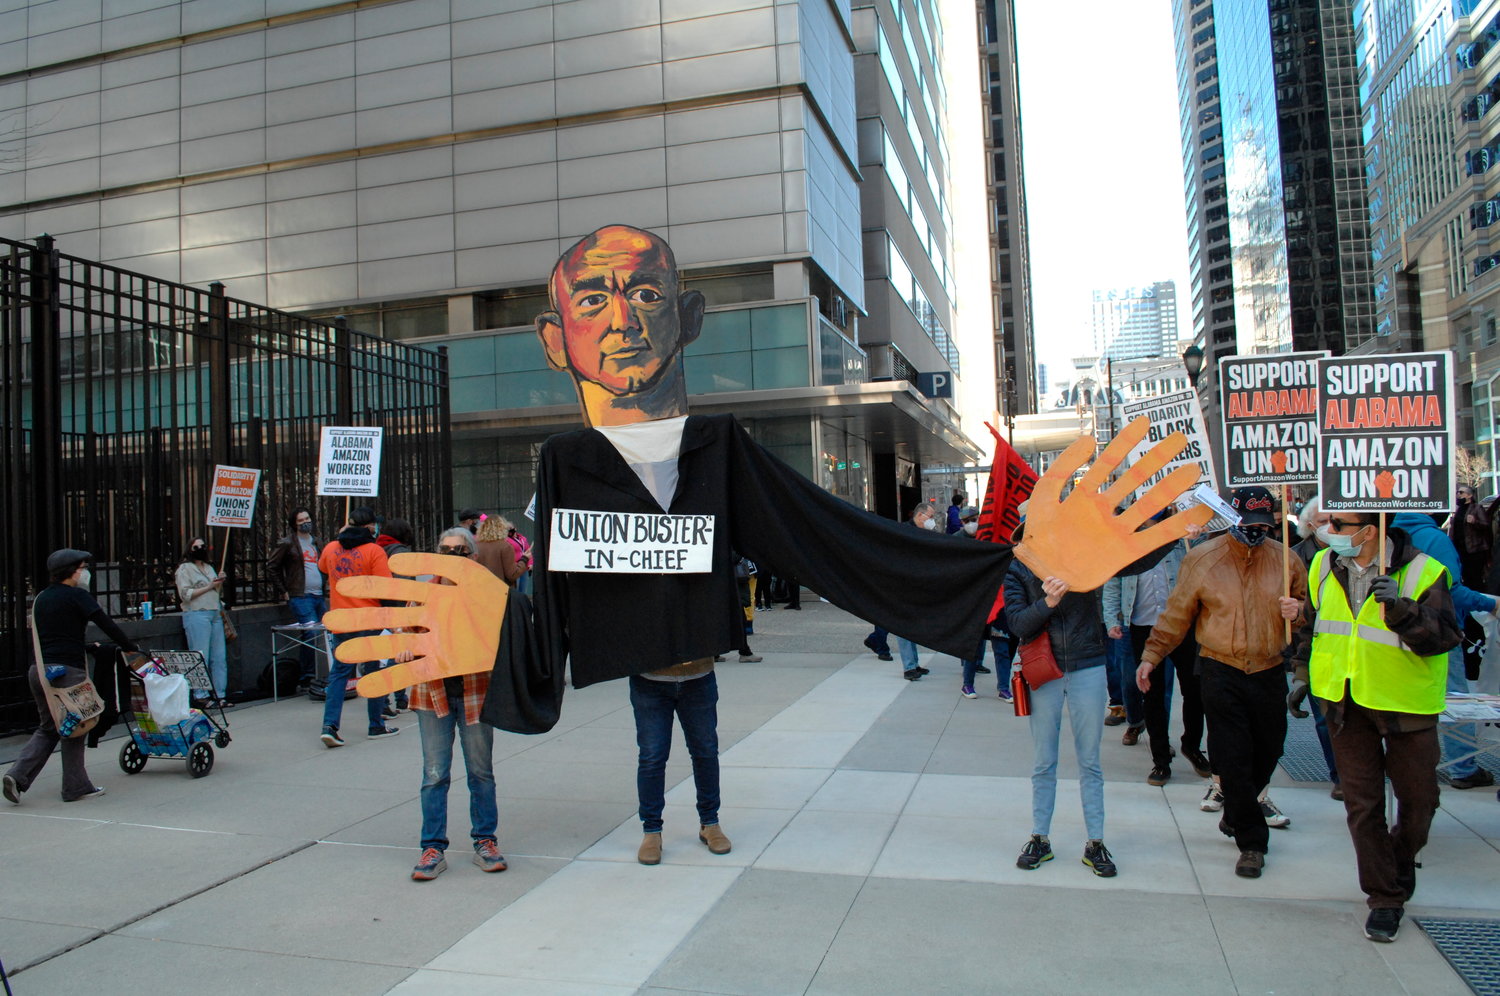 An effigy of Jeff Bazos stood in the center of a Philadelphia rally in solidarity with Amazon workers in Bessemer, Alabama, in March 2021 ahead of a unionizing vote there. A collective of philanthropic institutions has poured millions of dollars to help organizing efforts in five Southern states, including Alabama.